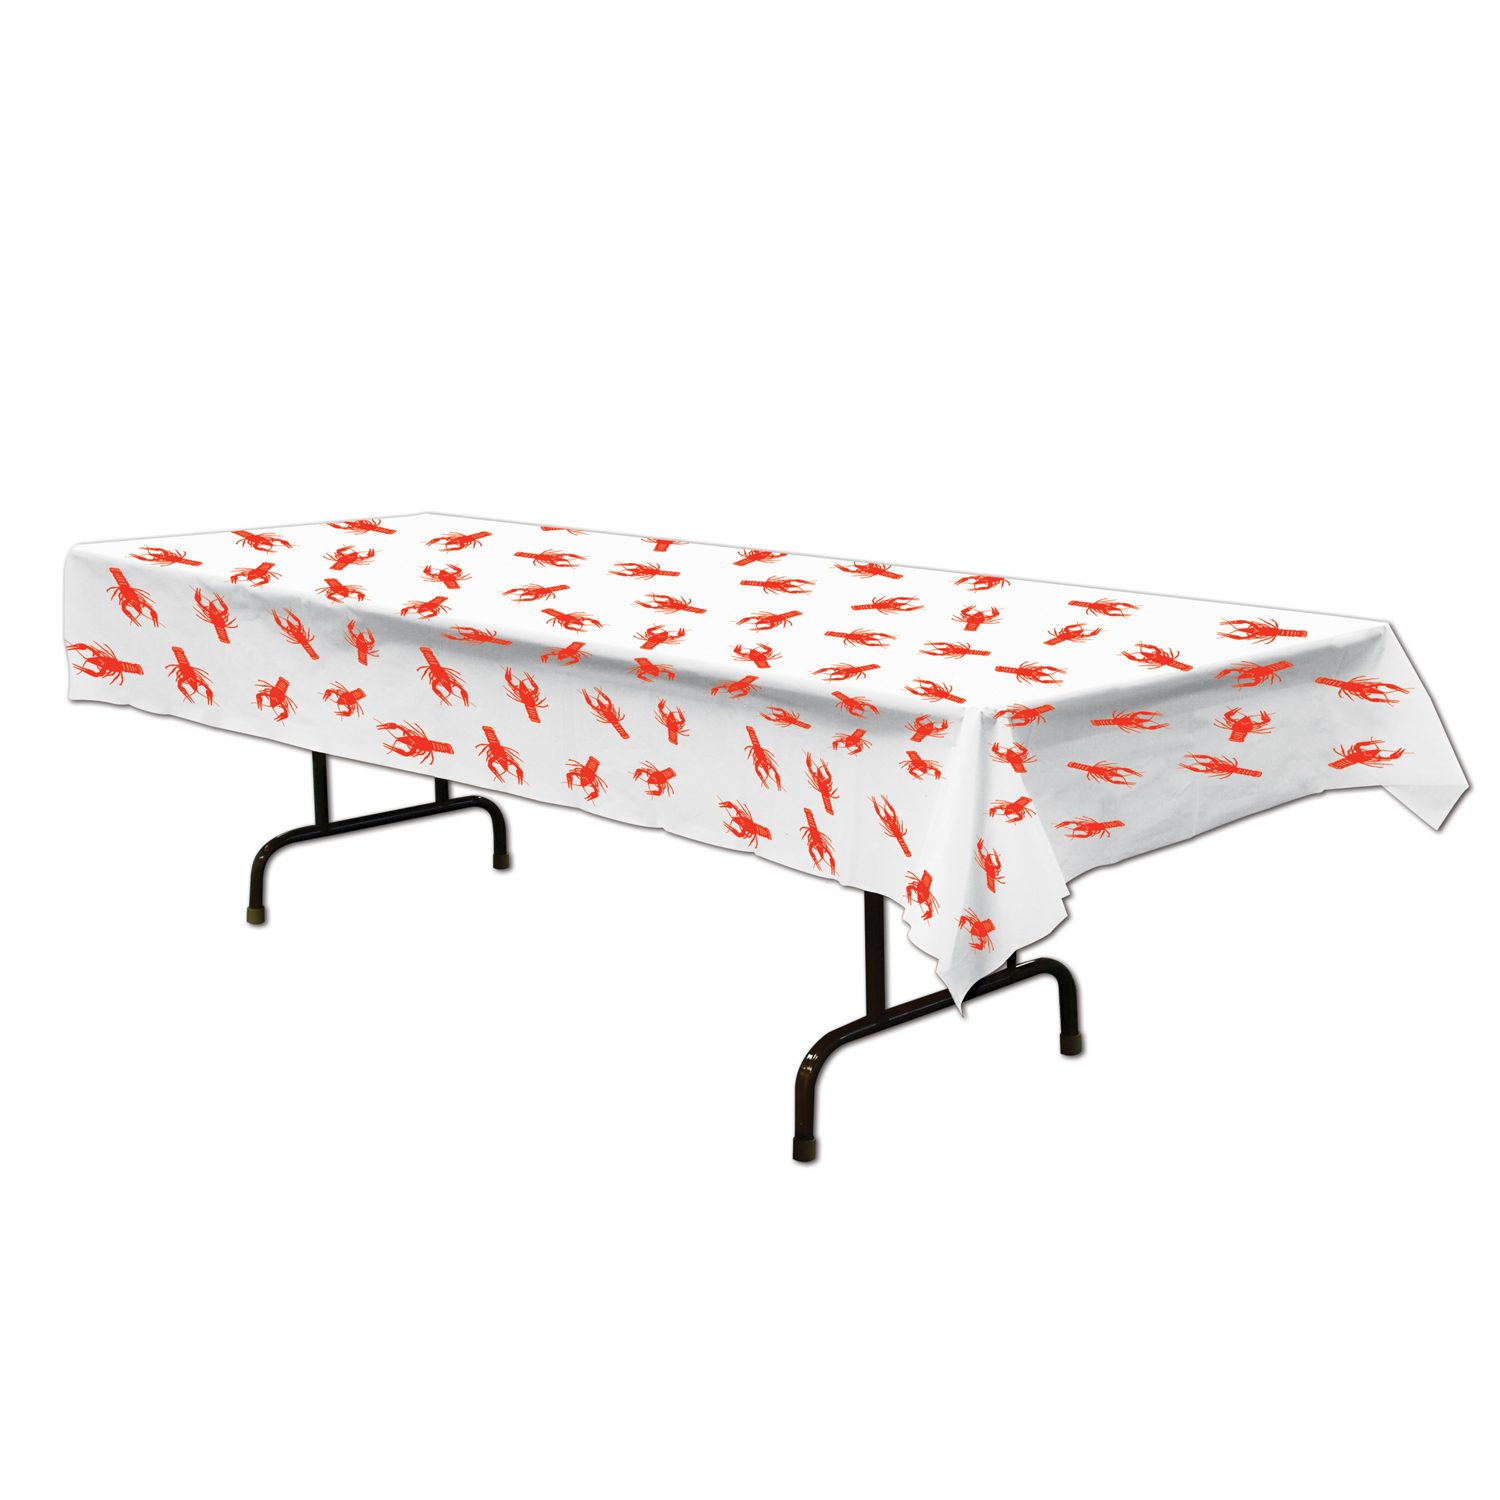 12 Wholesale Crawfish Tablecover